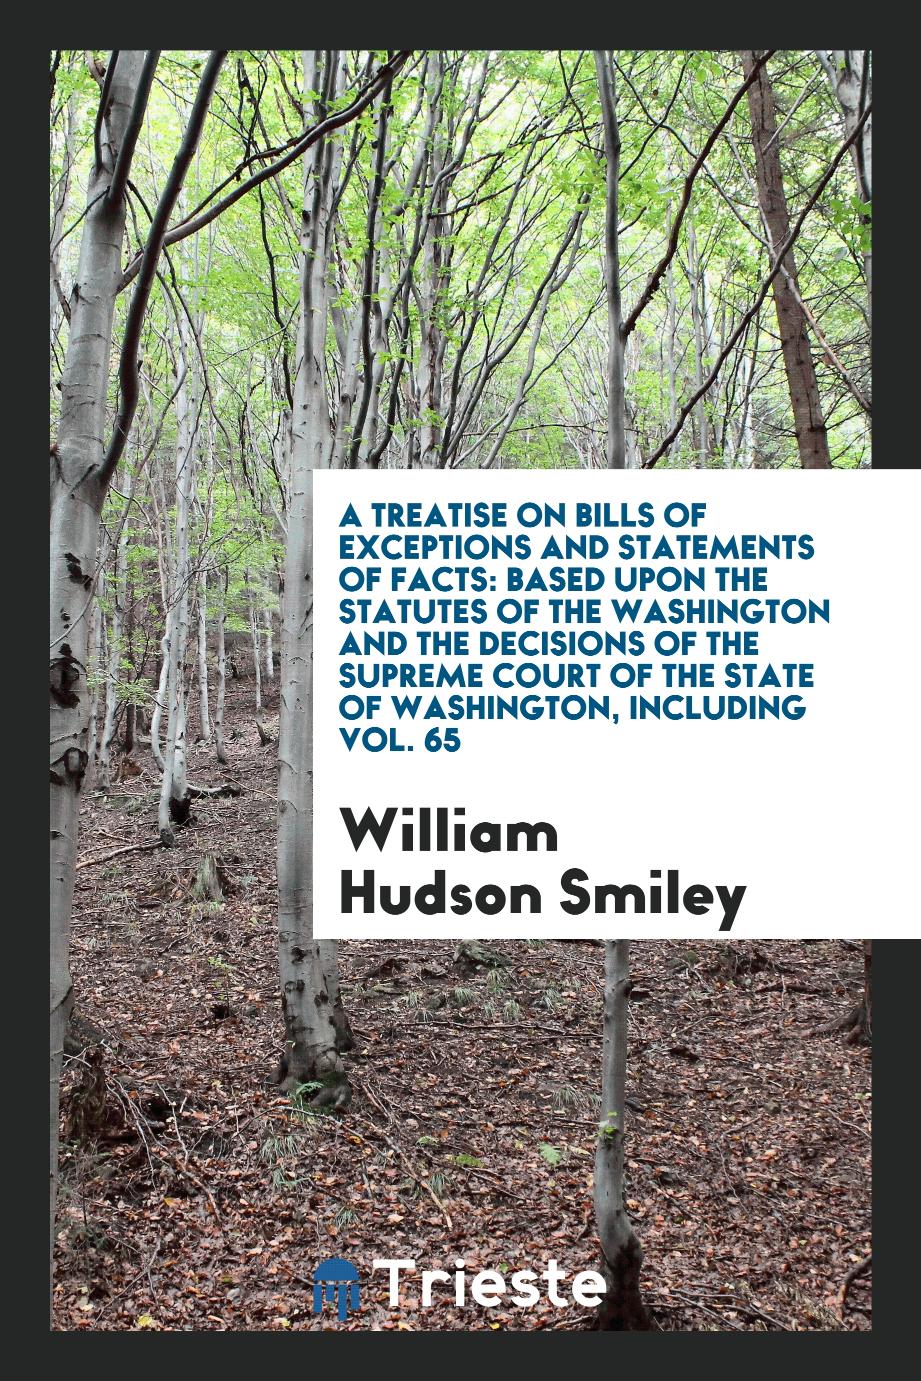 A Treatise on Bills of Exceptions and Statements of Facts: Based upon the Statutes of the Washington and the Decisions of the Supreme Court of the State of Washington, Including Vol. 65